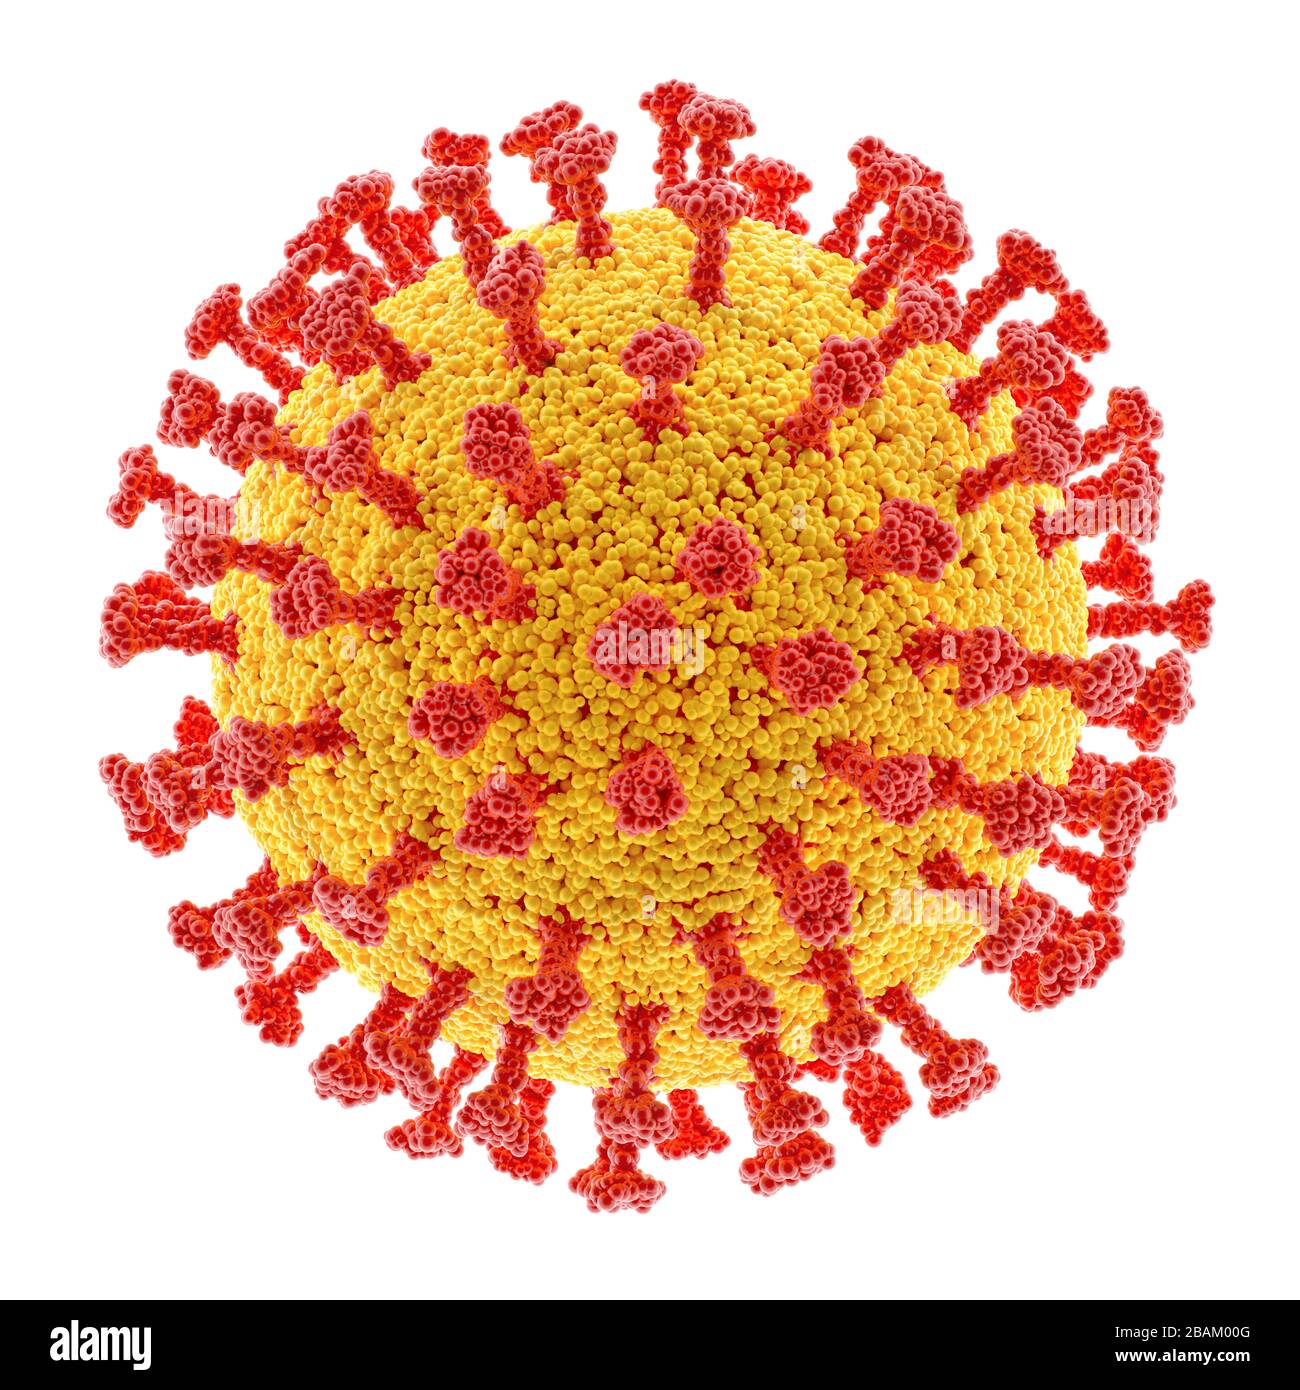 Virus conceptual with clipping path included. The structure of a virus. Covid-19, Coronavirus, Influenza, HIV. Concept image of infectious diseases. 3 Stock Photo